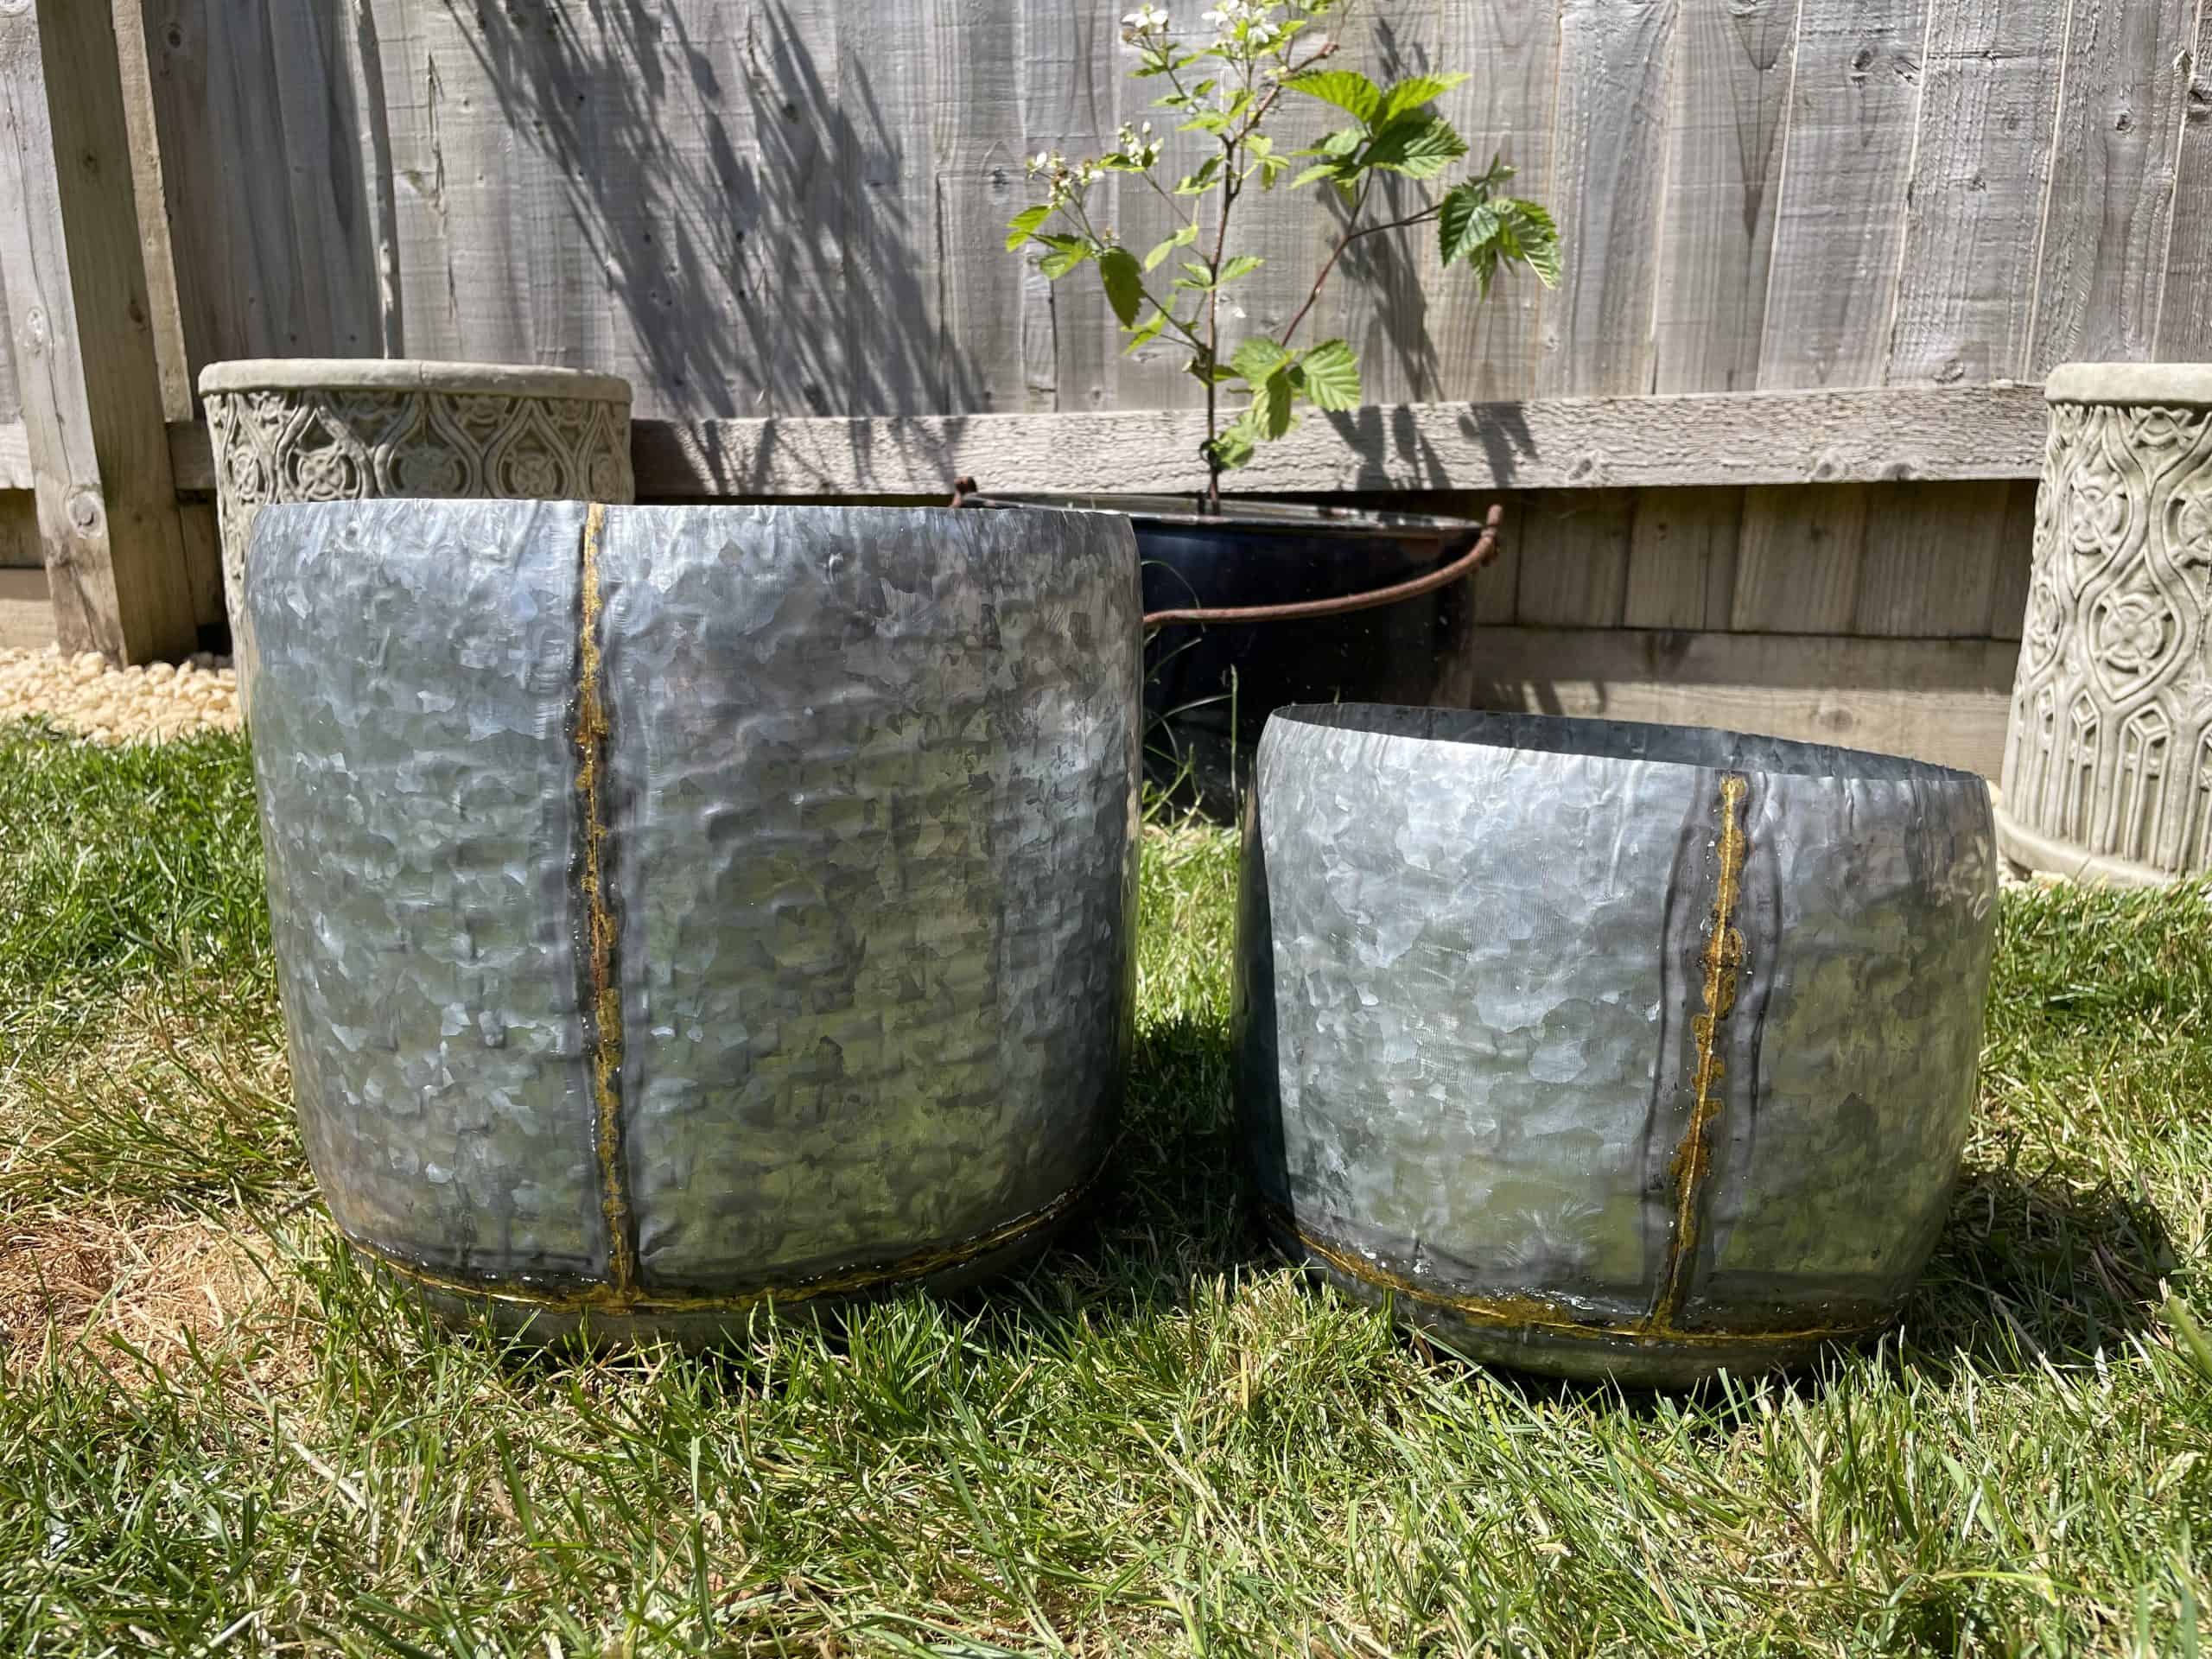 Two plant pots of metal silver finish with golden stripe from top to bottom. Situated in the garden of a British home with green grass and wooden fence